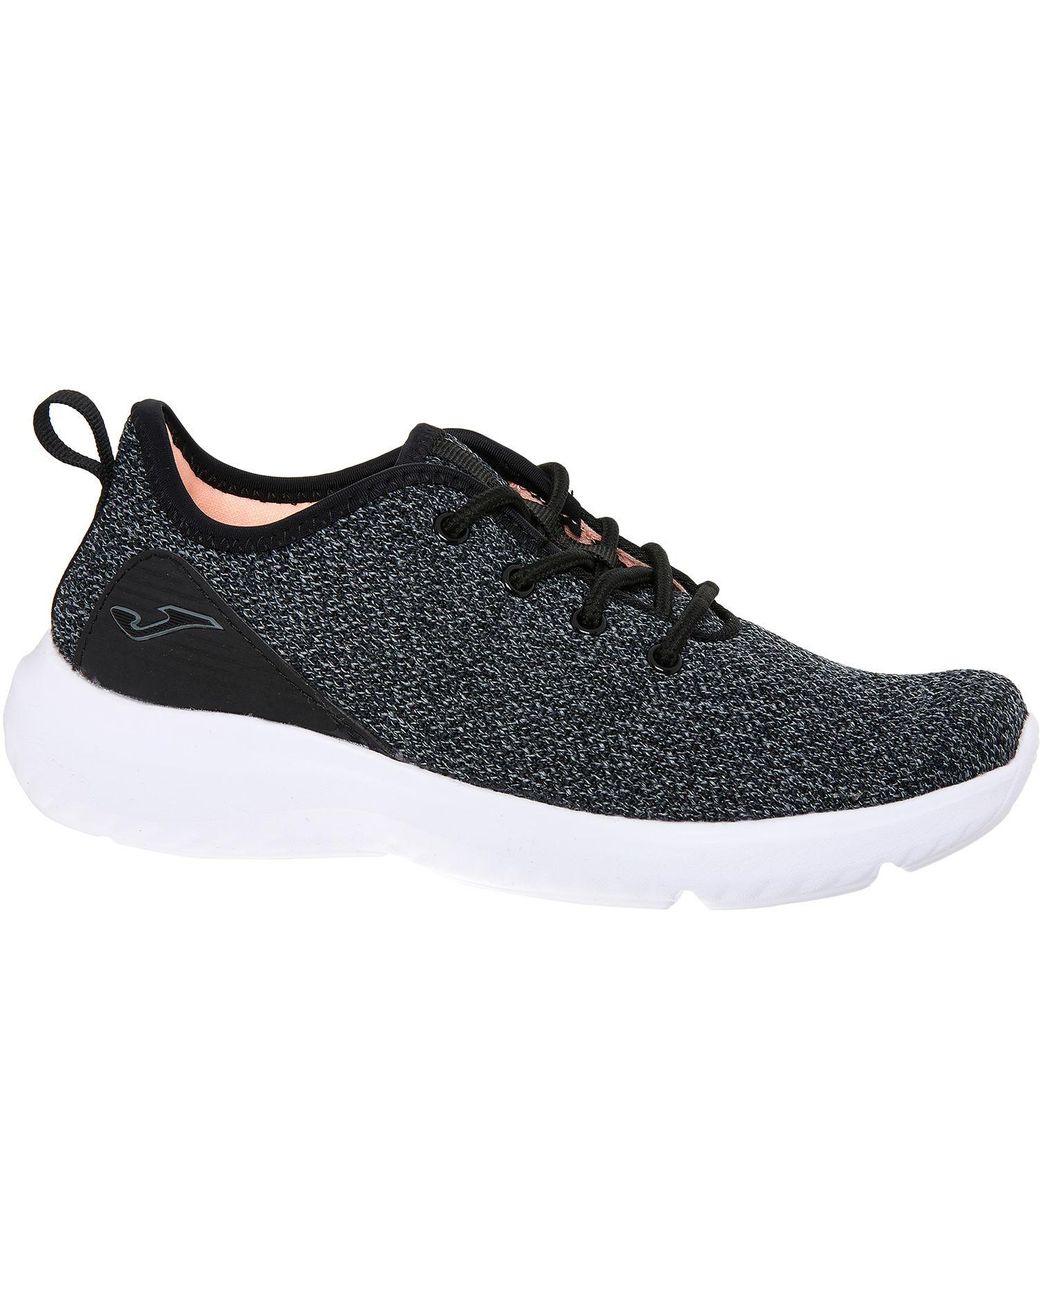 Shop Sketchers At Tk Maxx | UP TO 51% OFF